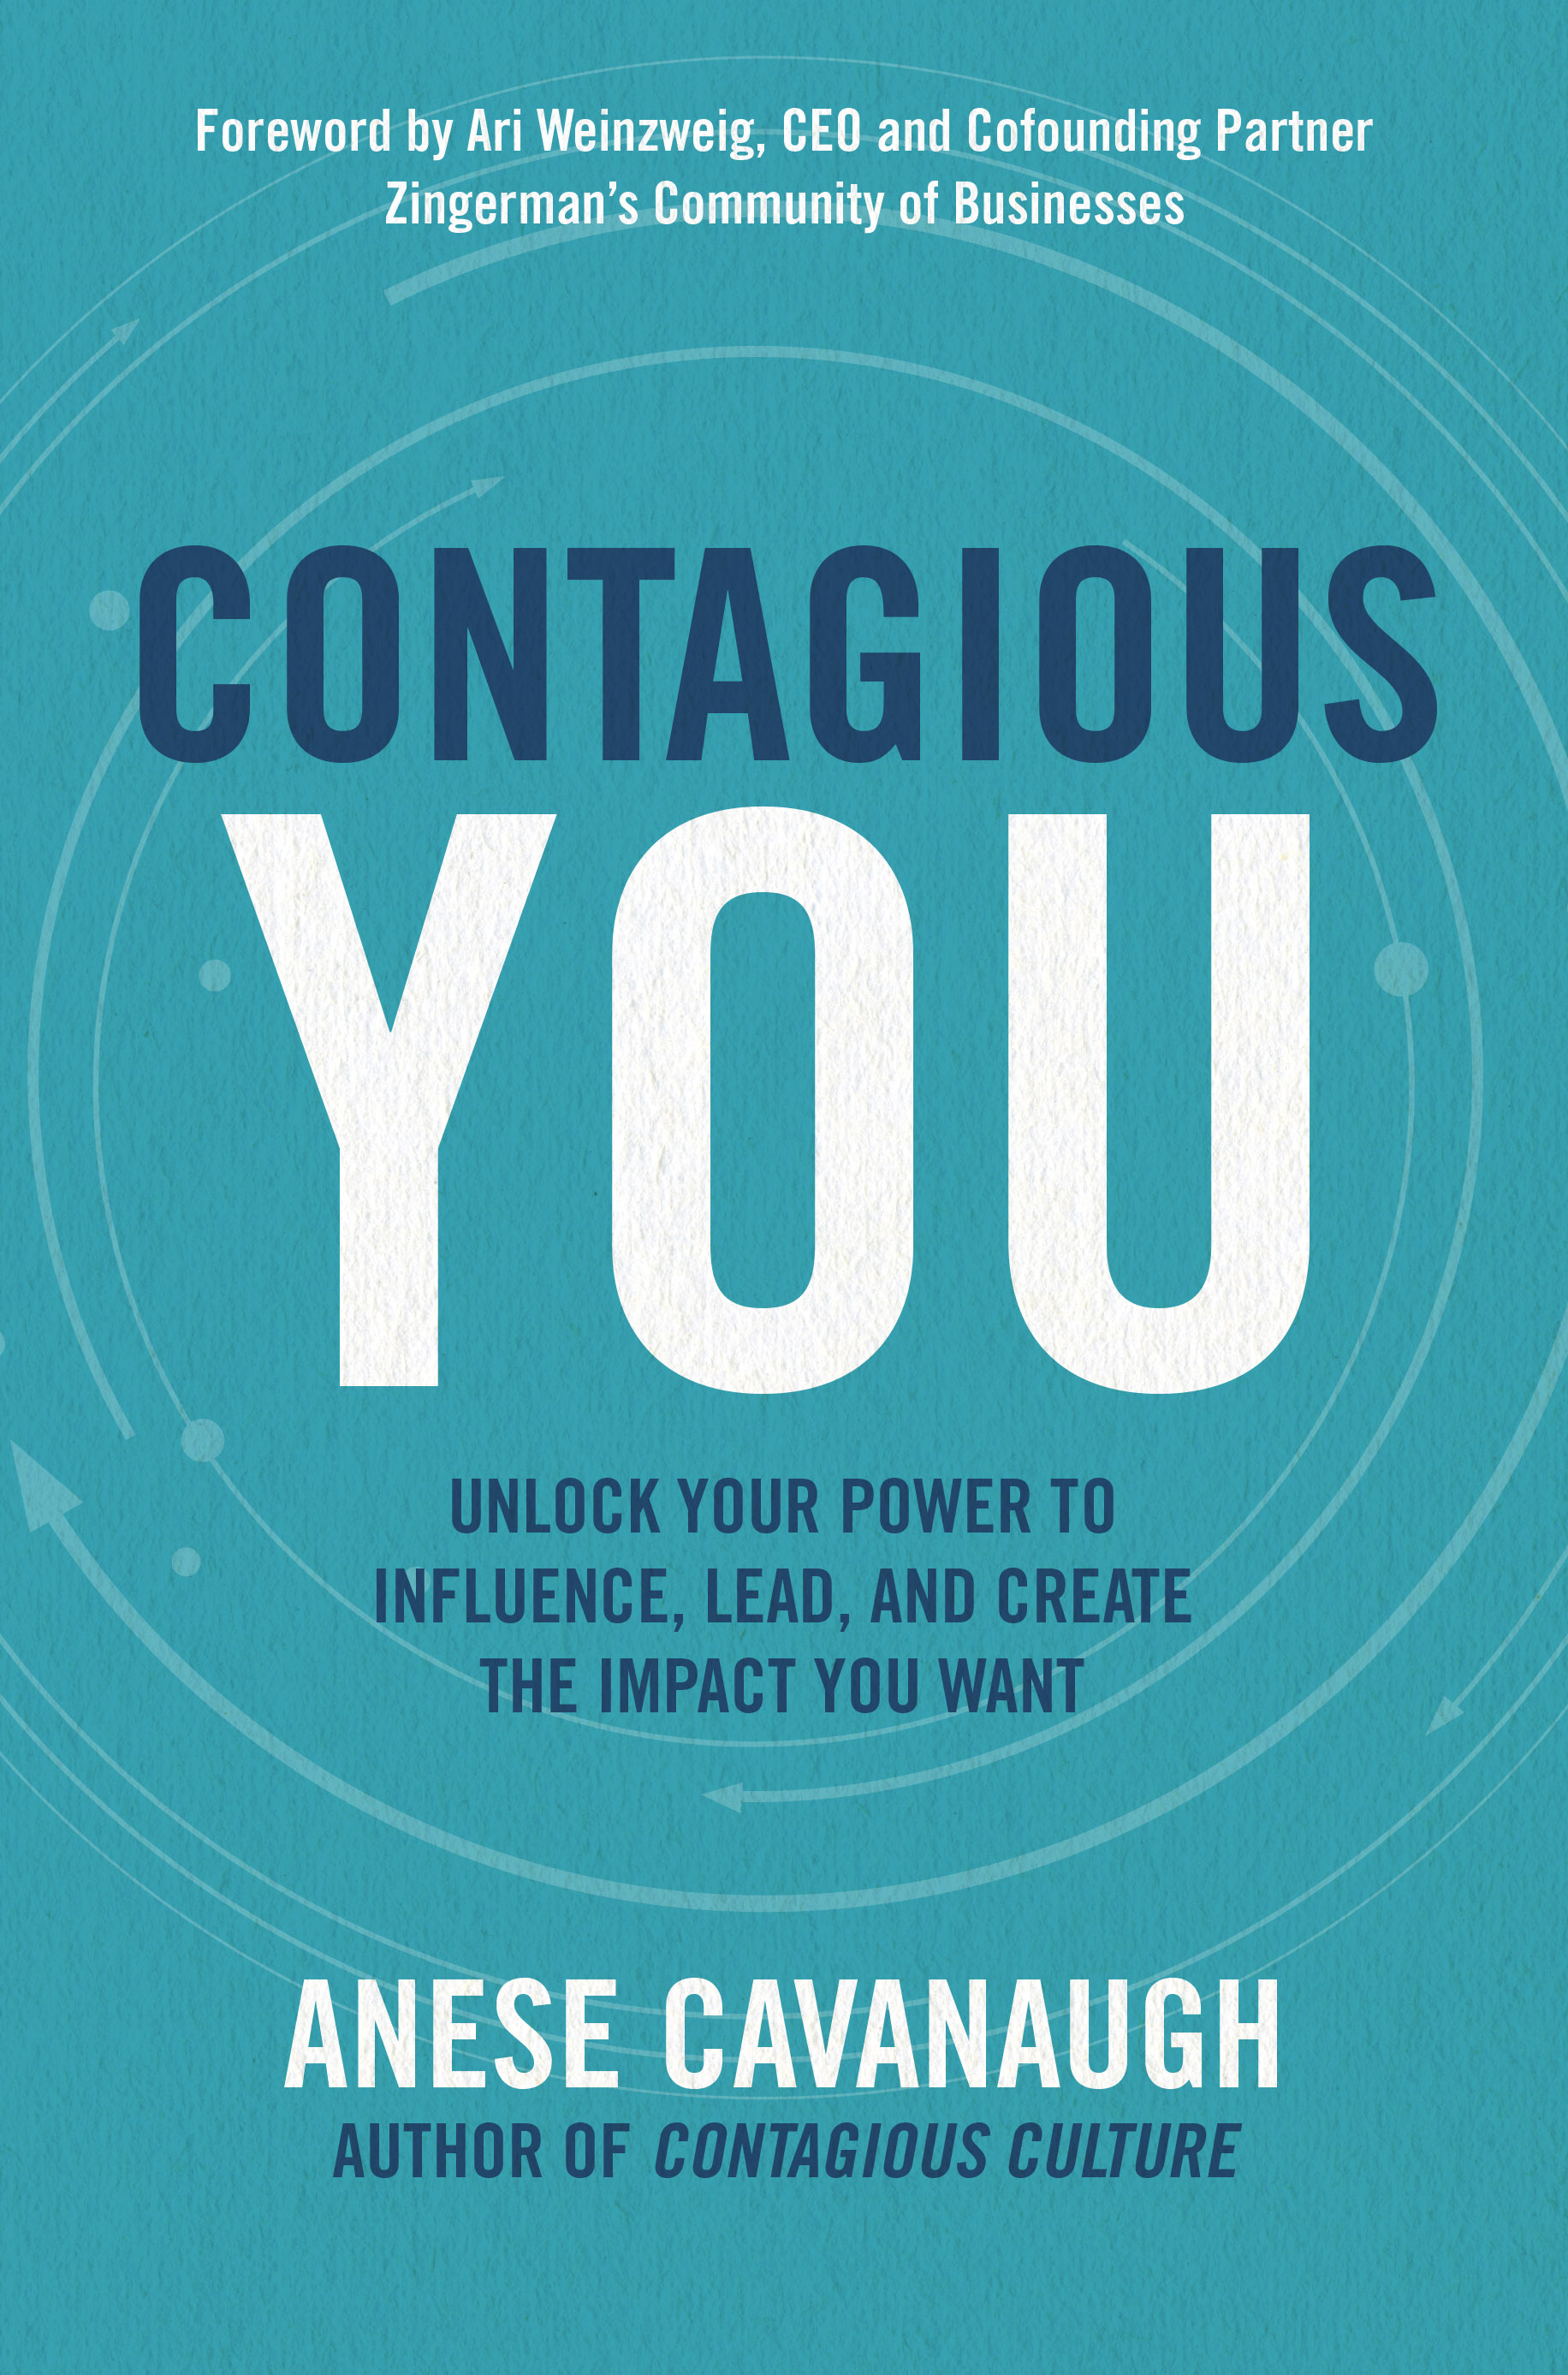  Contagious You: Unlock Your Power to Influence, Lead, and Creat the Impact You Want